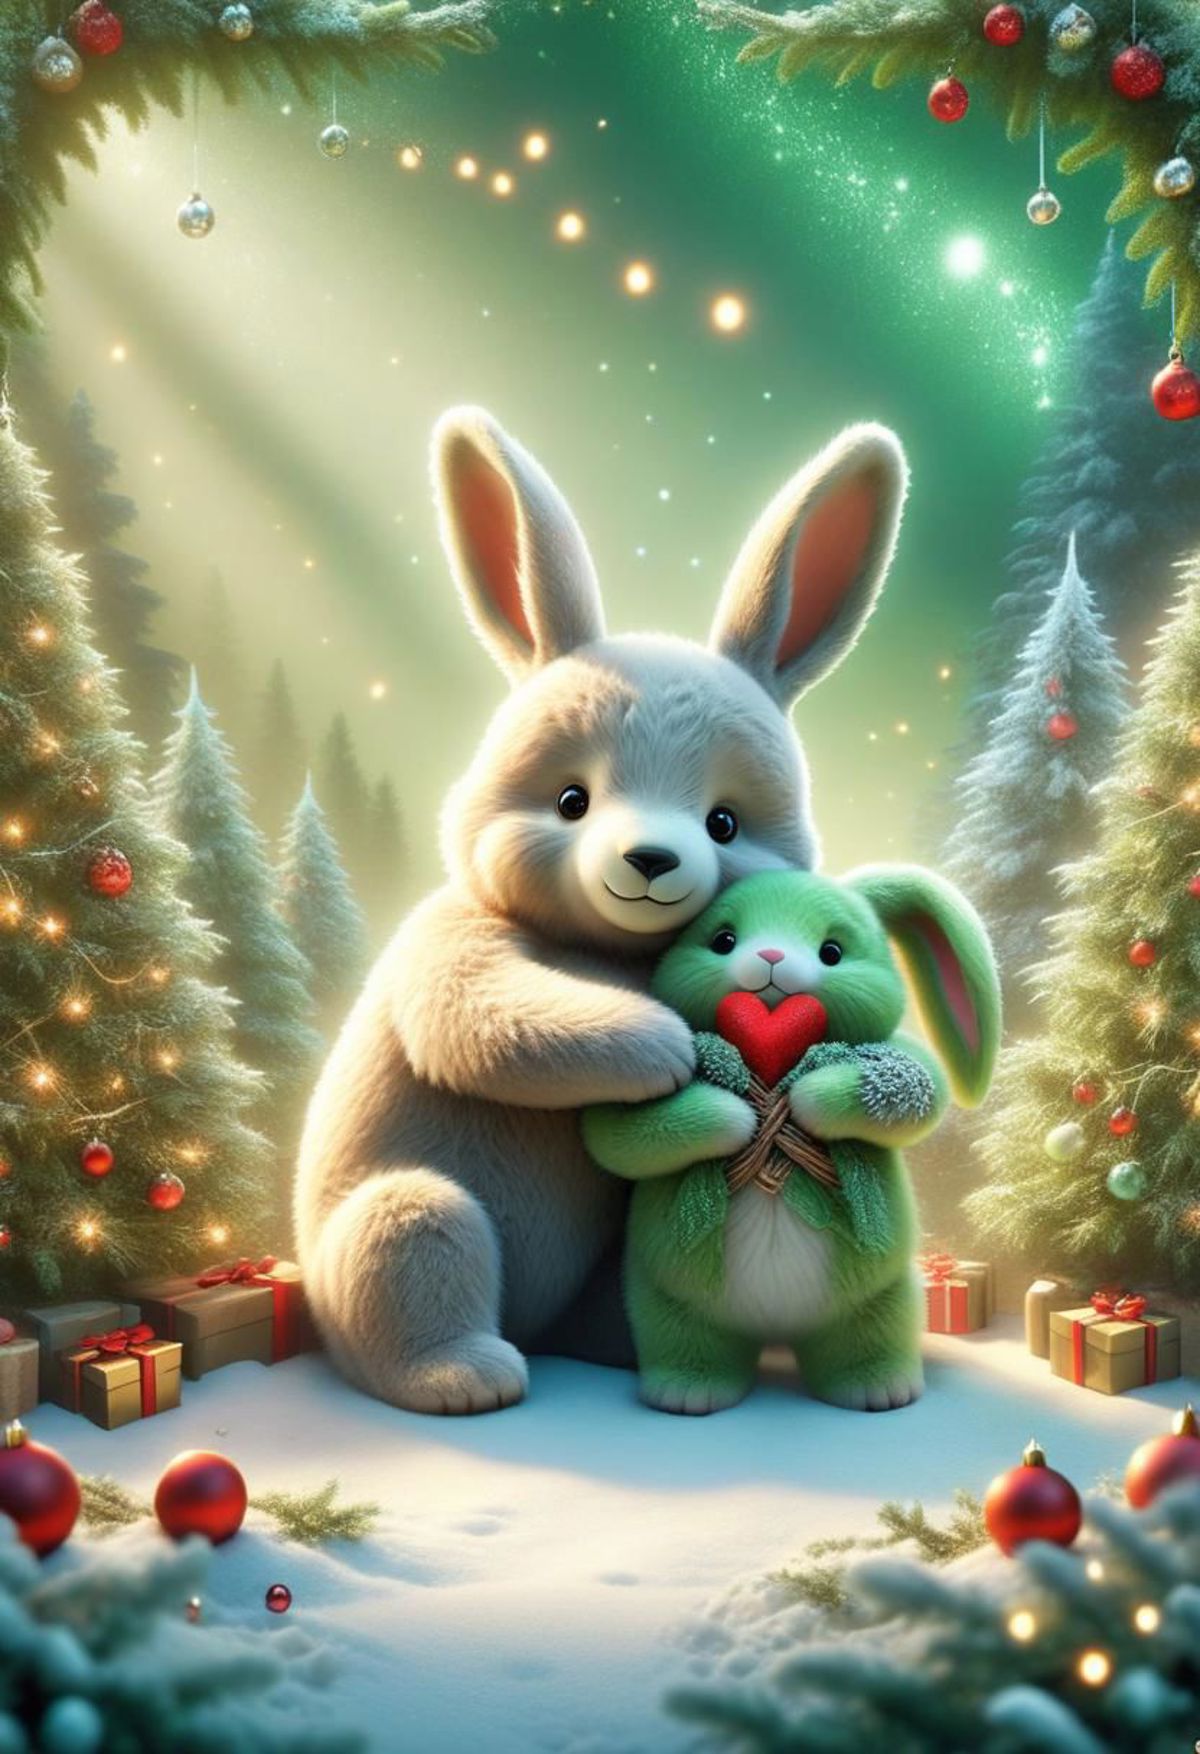 A white teddy bear hugging a green teddy bear in front of a Christmas tree.